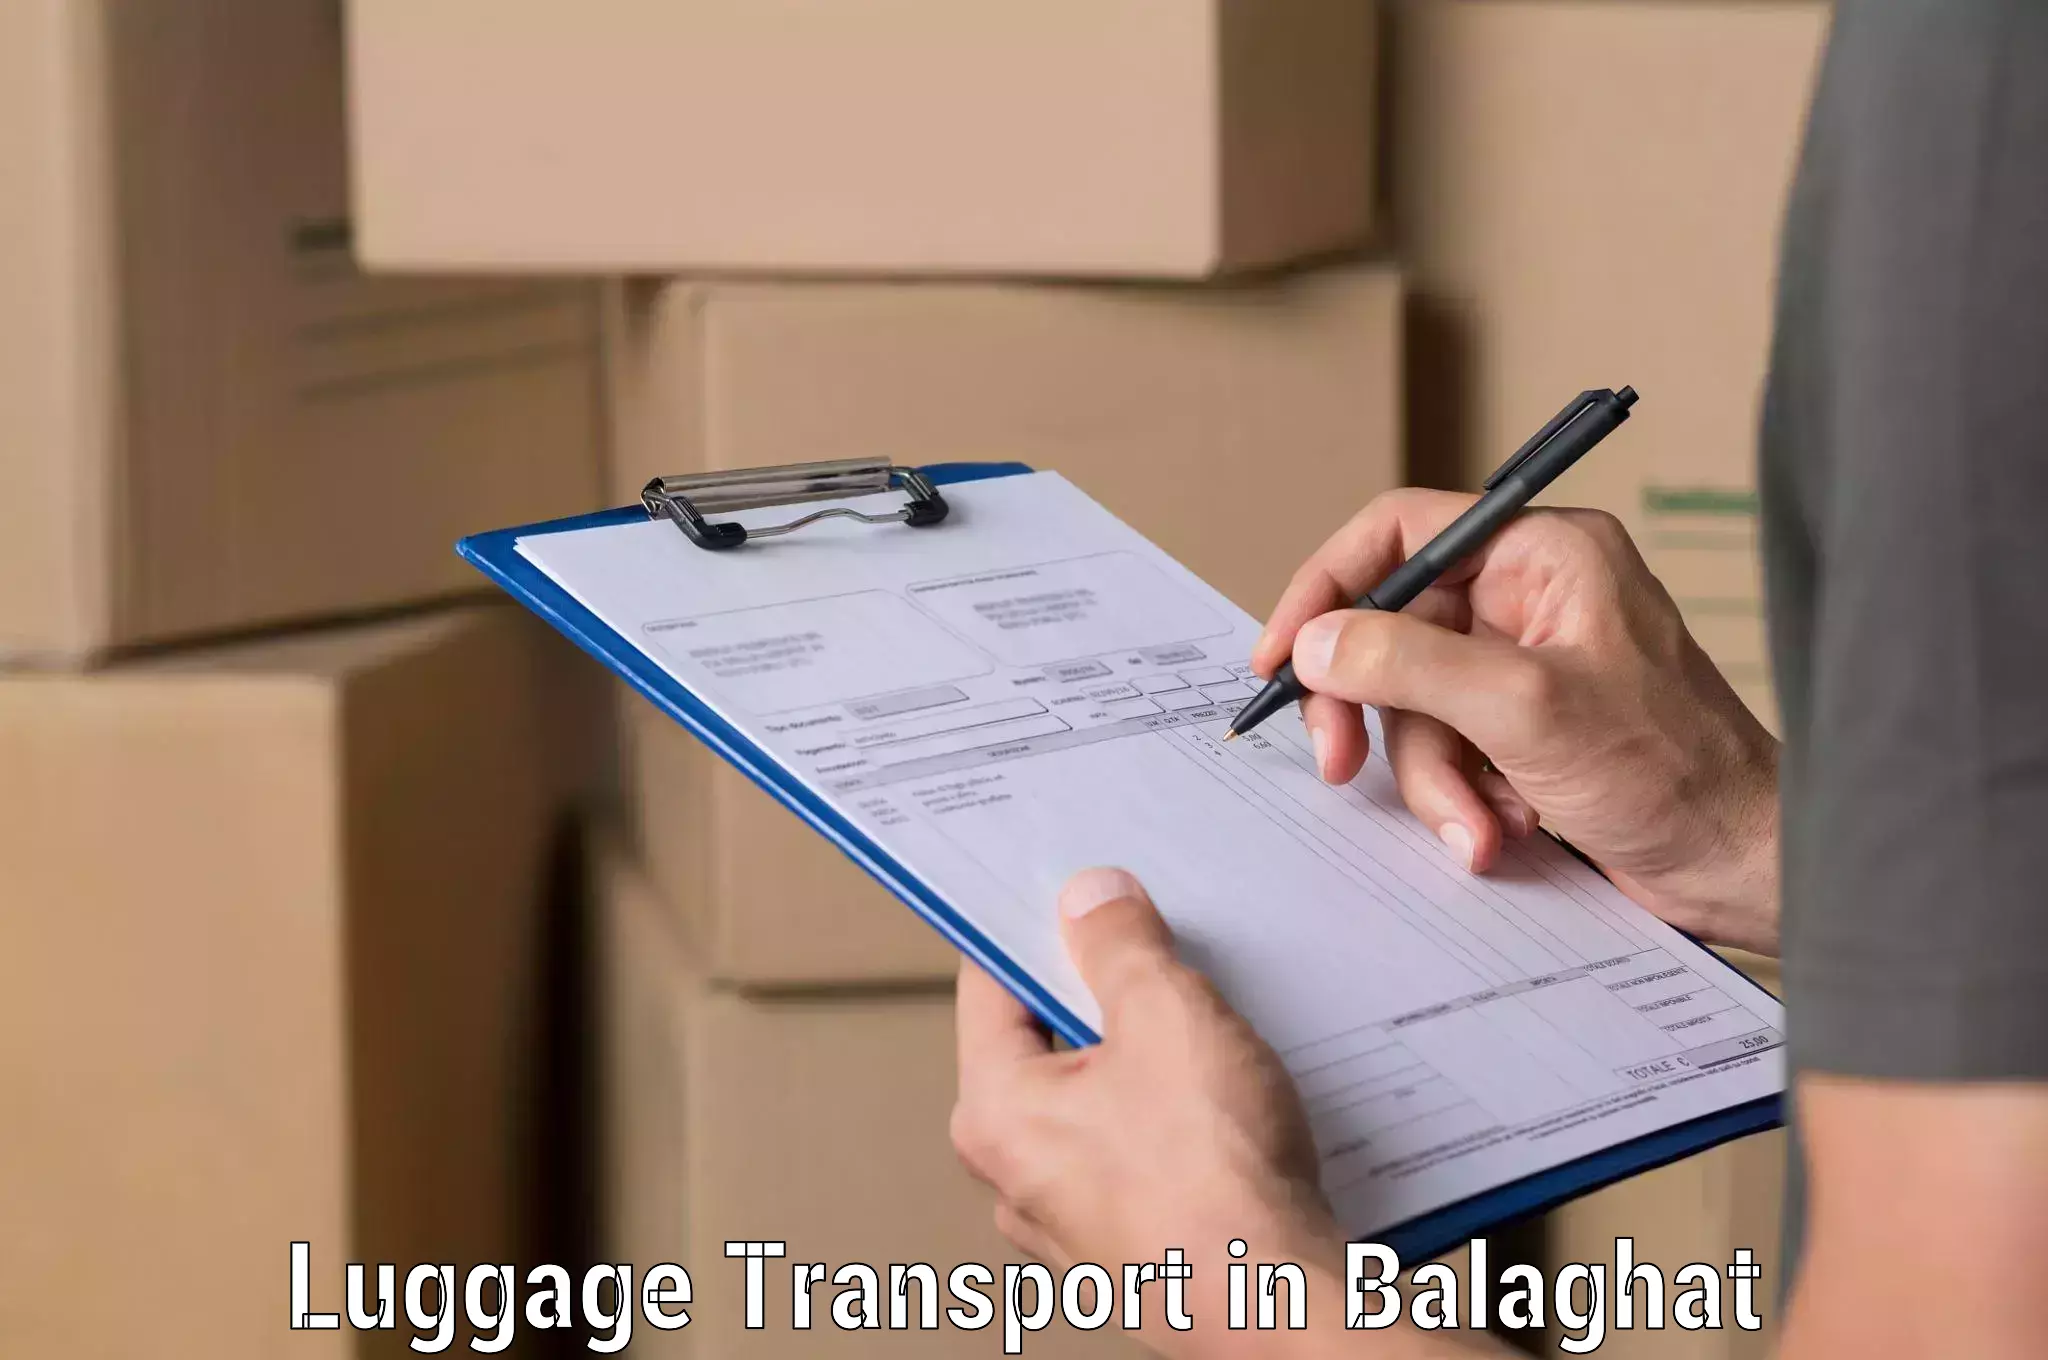 Luggage delivery app in Balaghat